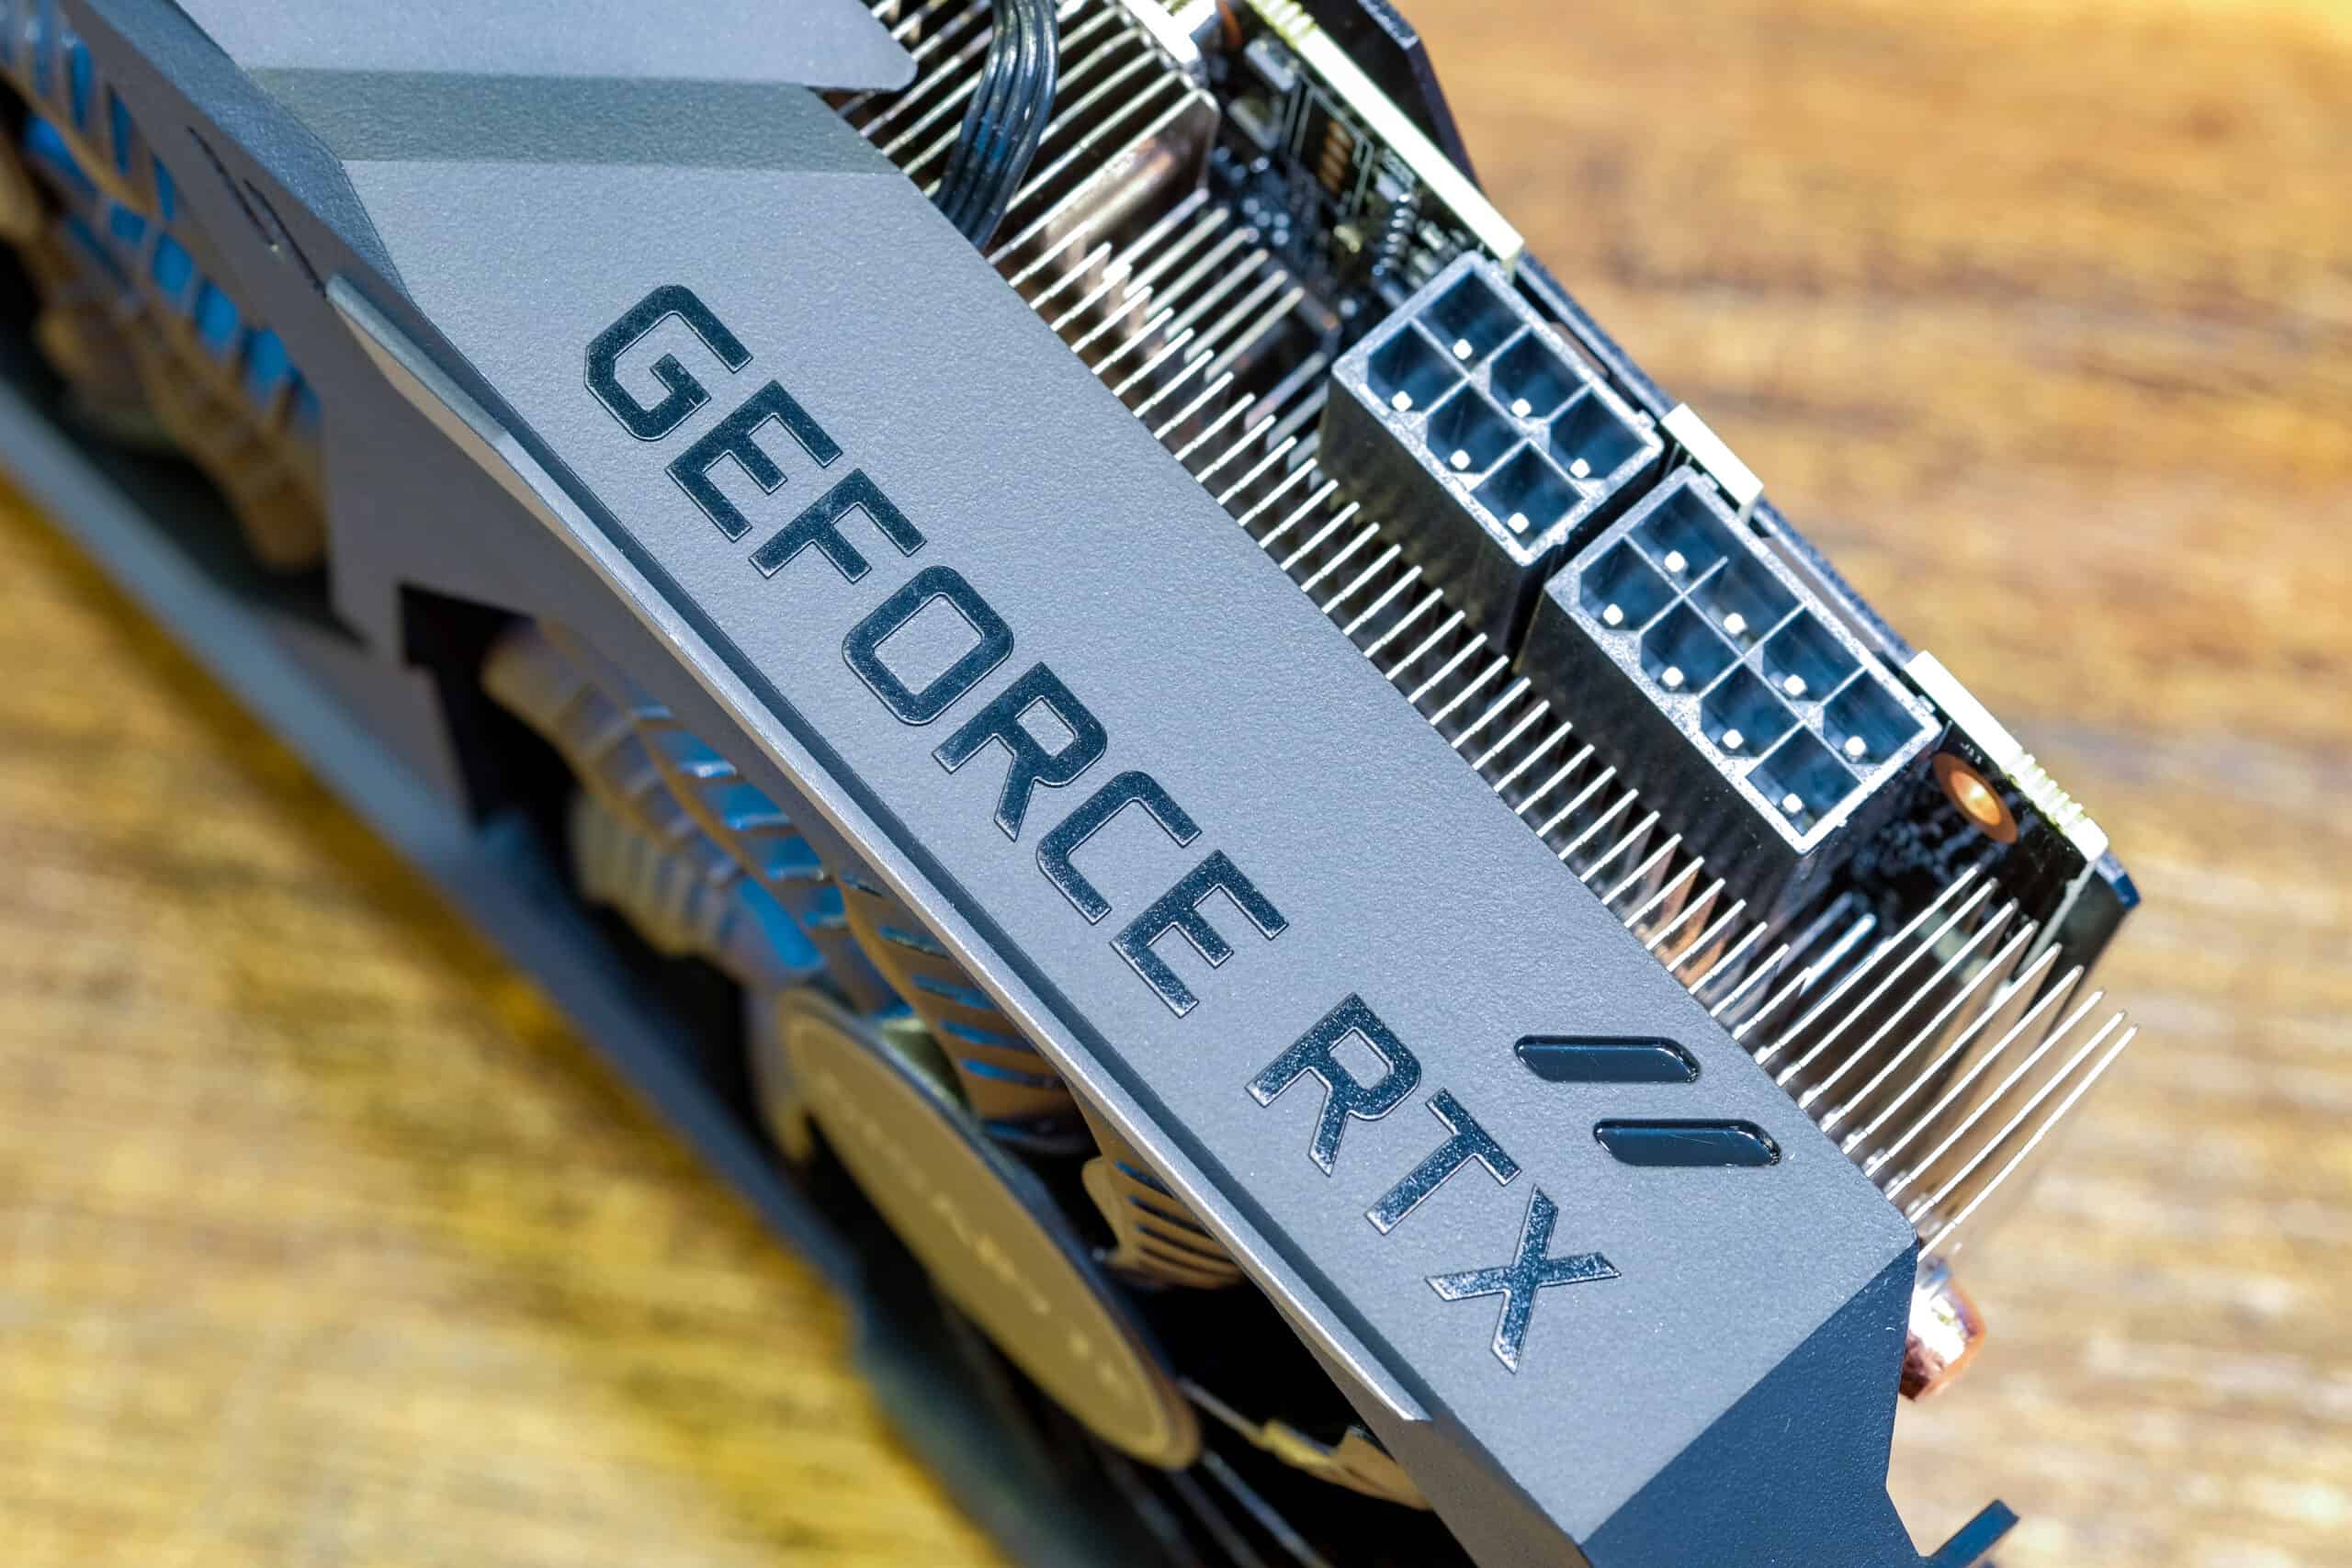 NVIDIA GE Force RTX graphics card